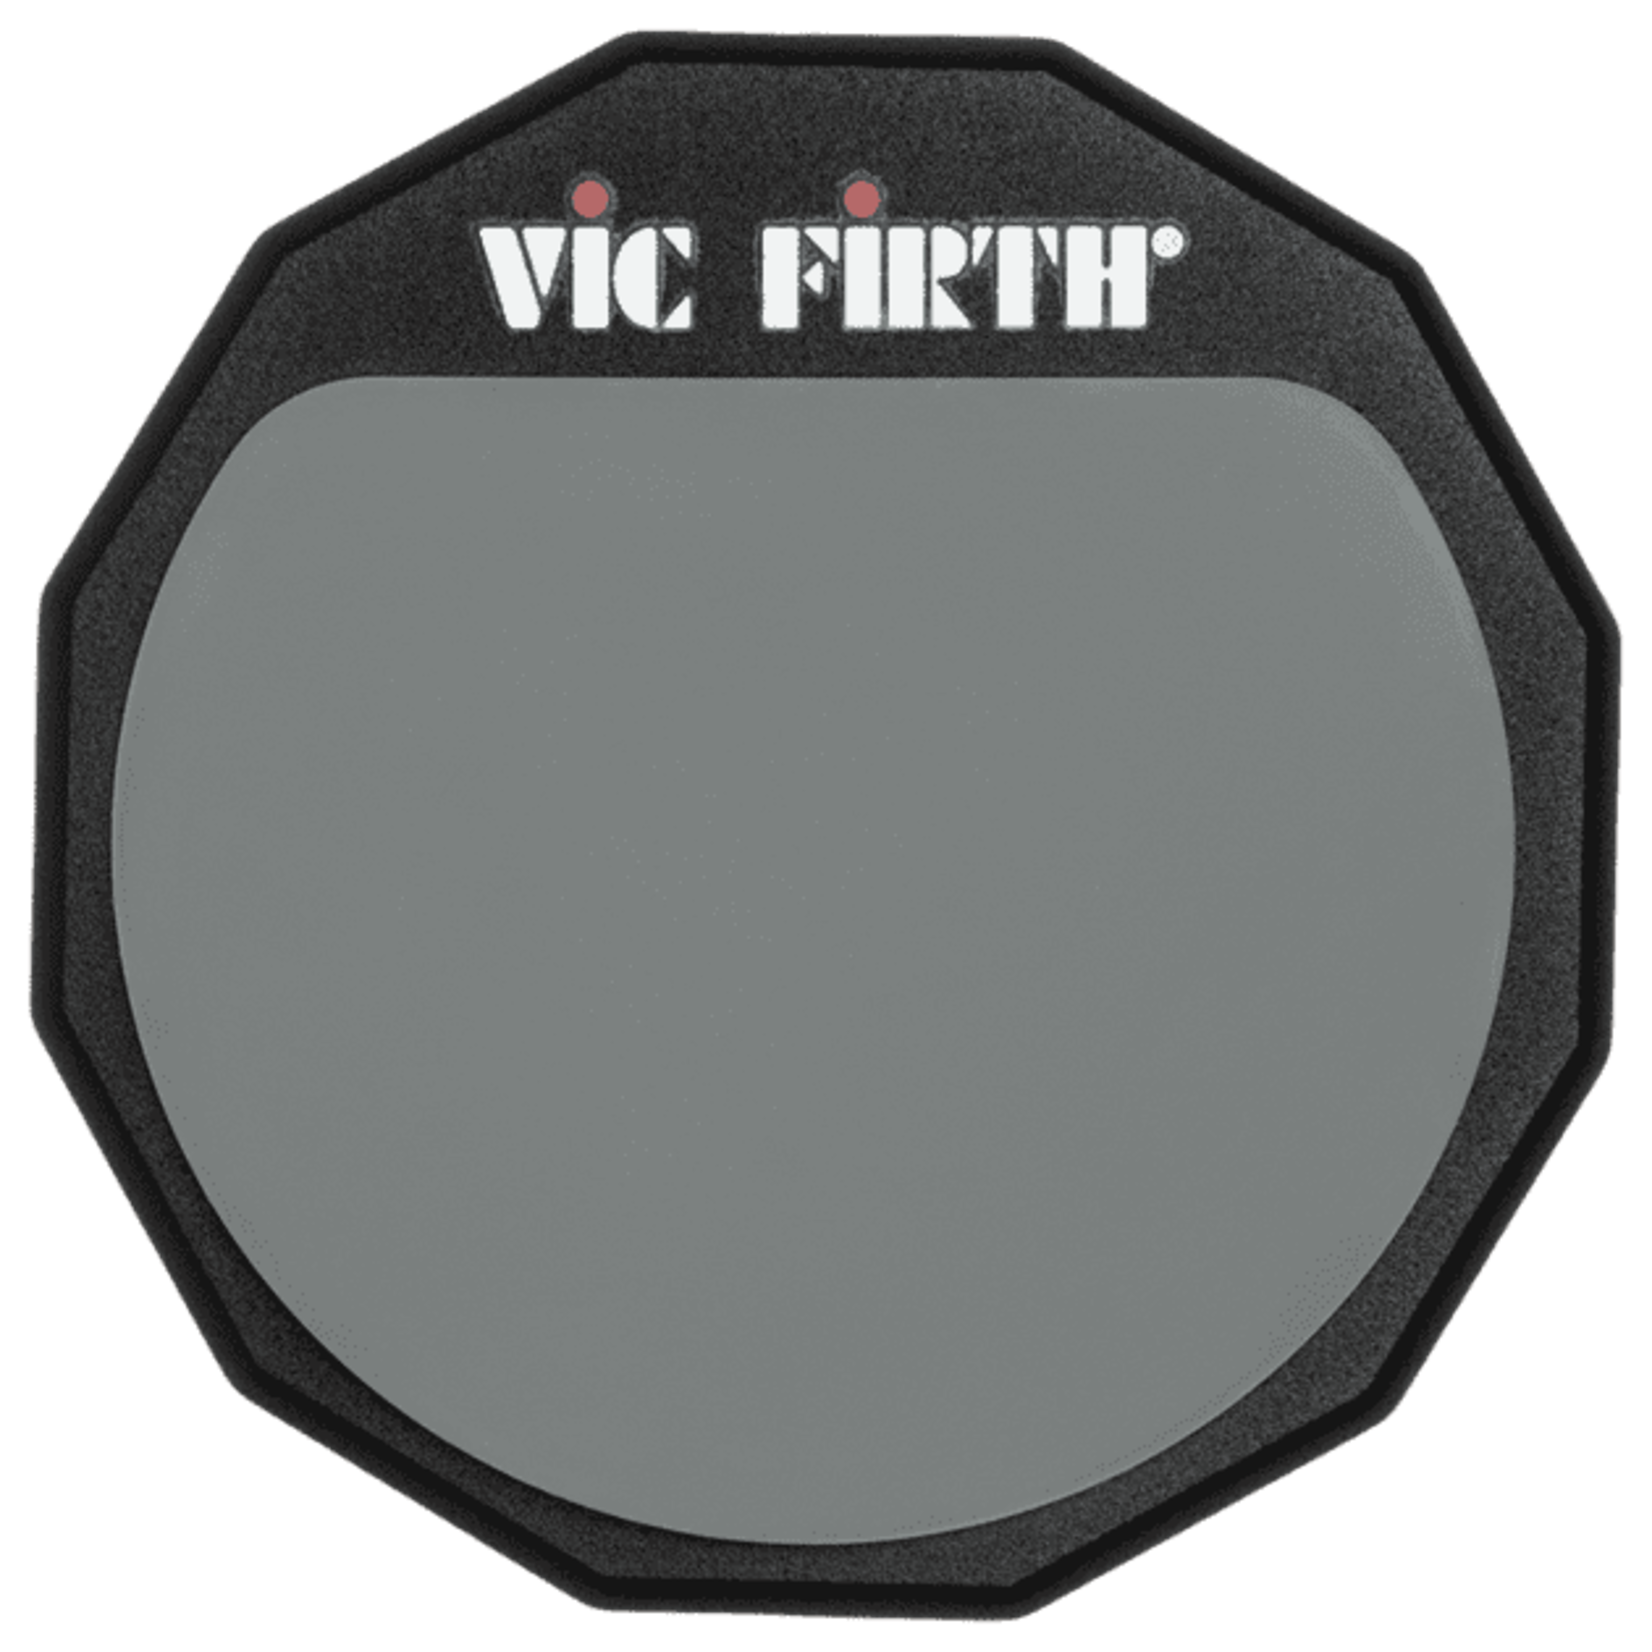 Vic Firth VIC FIRTH 6" SINGLE SIDE PRACTICE PAD